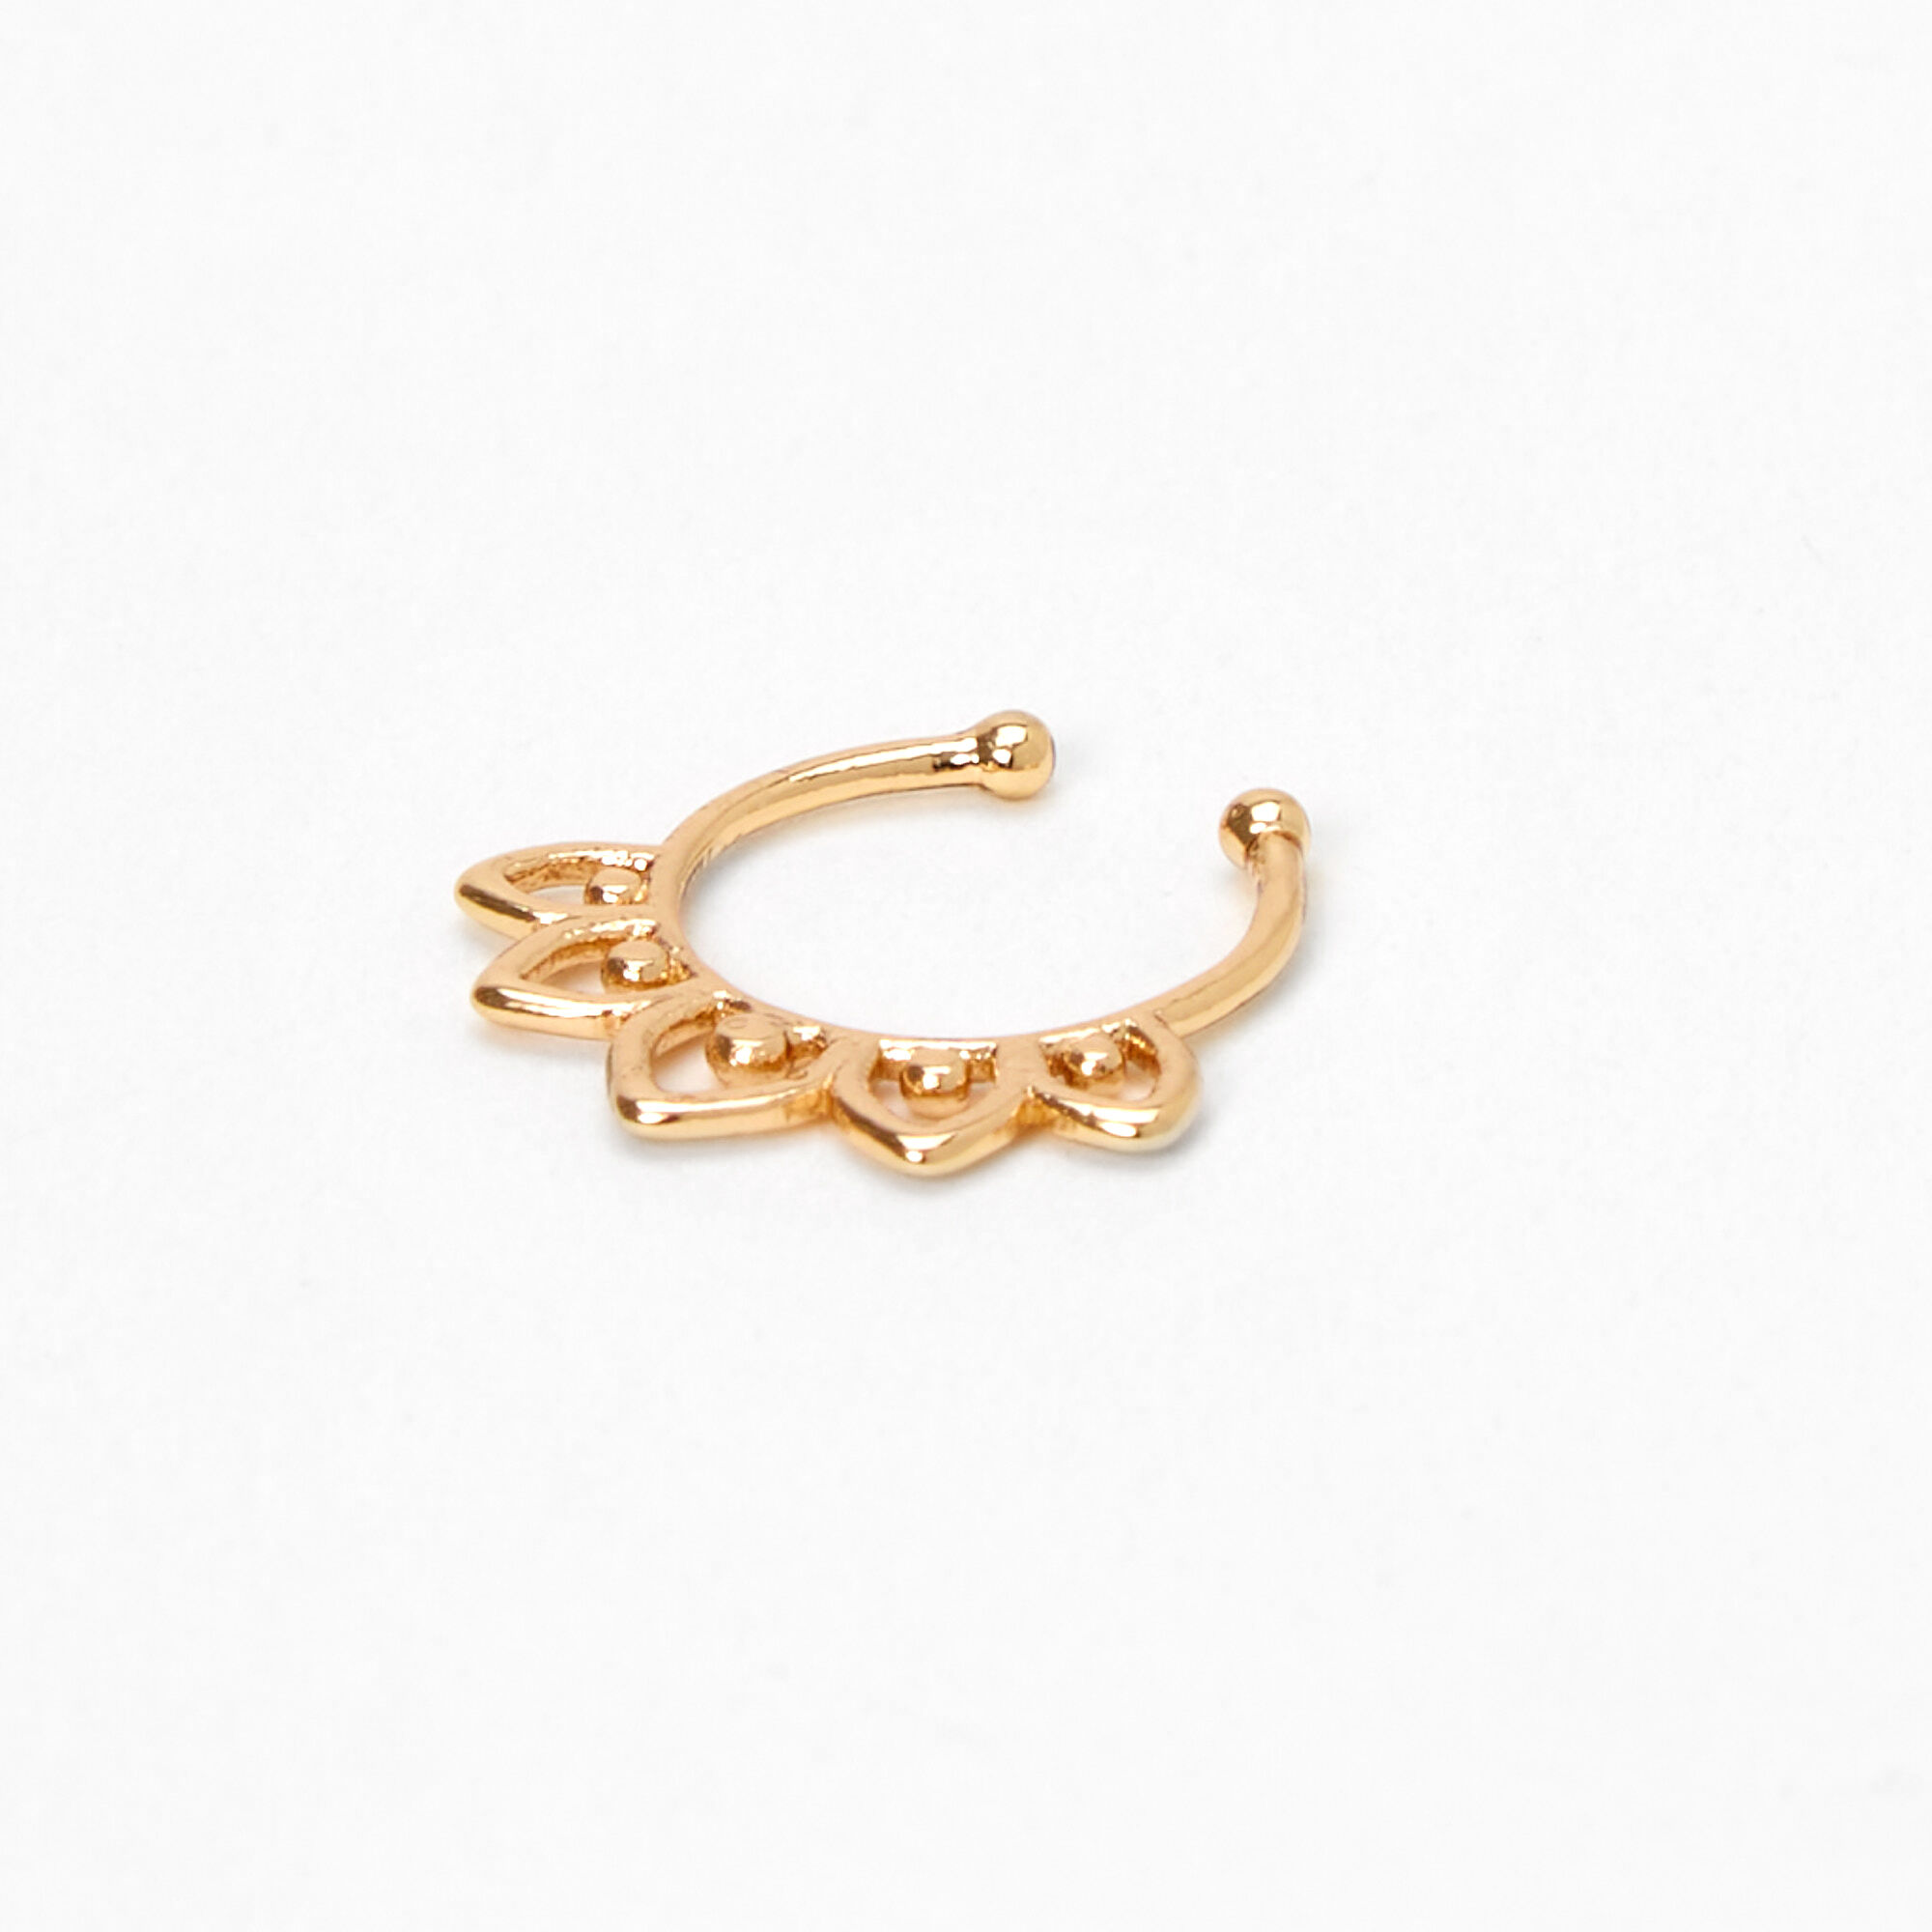 Buy Fake Septum Ring Gold Faux Septum Ring Fake Nose Ring Fake Nose Stud Fake  Piercing 14k Septum Gold Septum Jewelry Septum Ring Online in India - Etsy